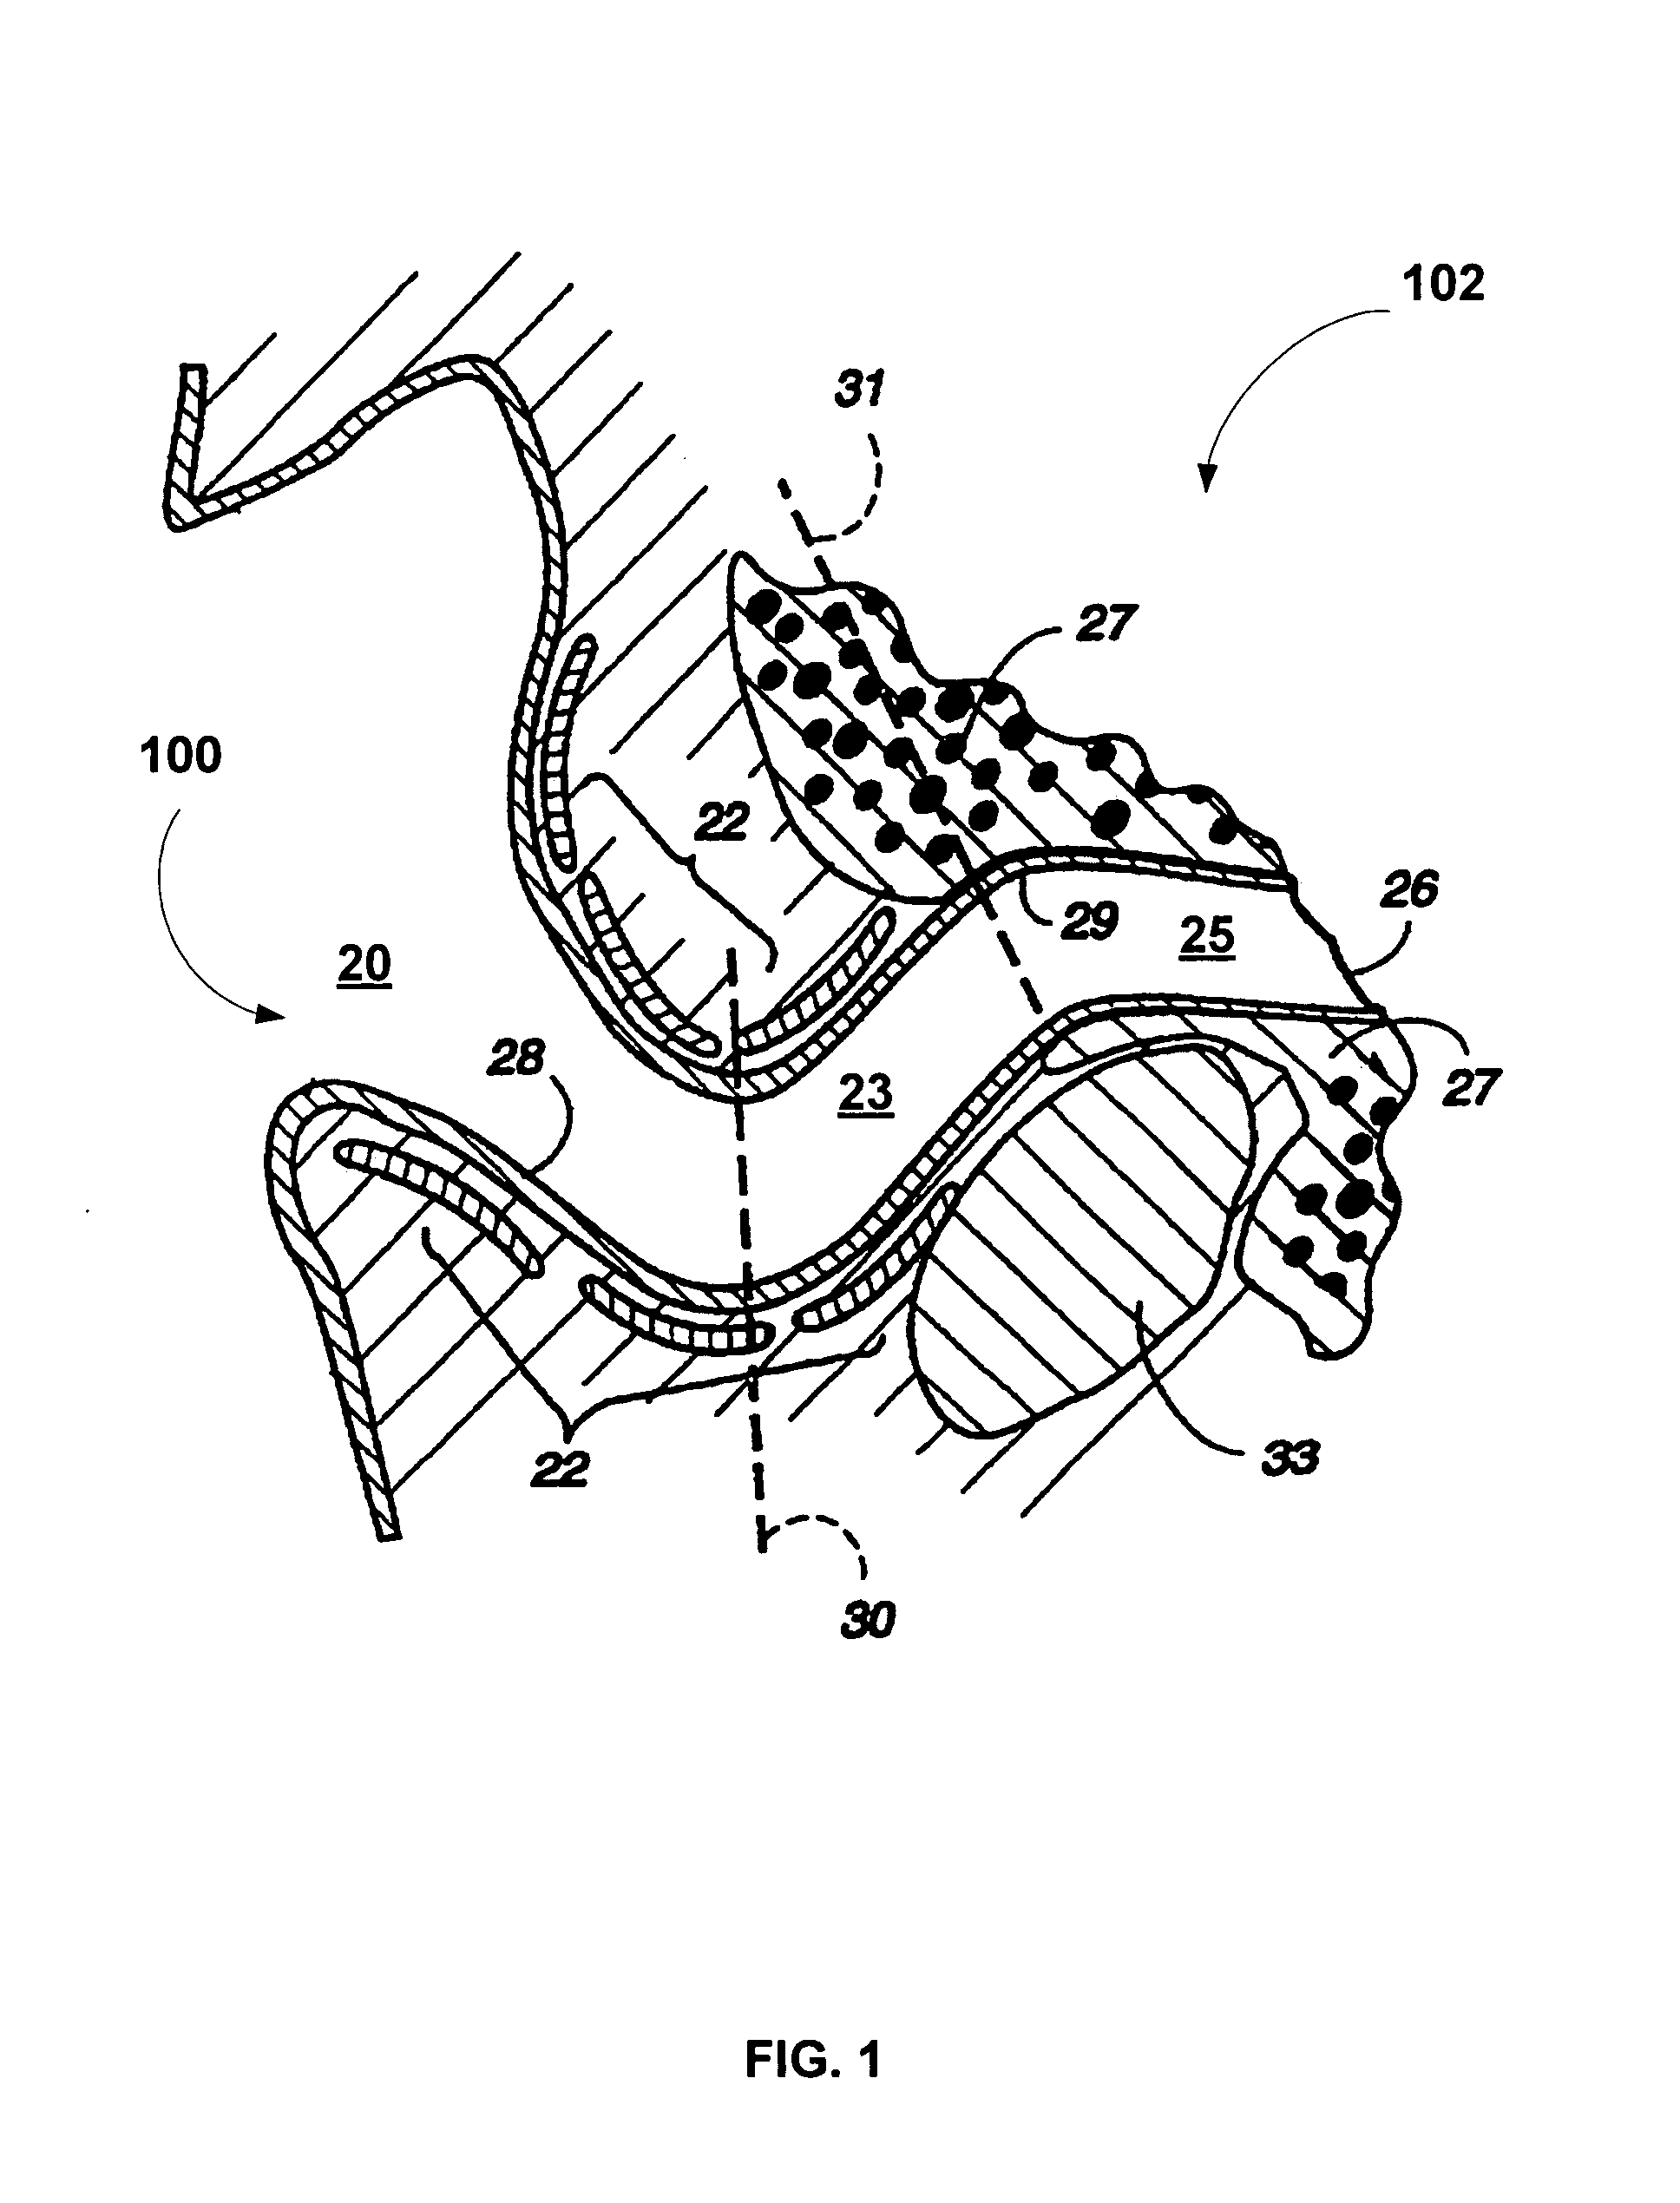 Pulse oximetry methods and apparatus for use within an auditory canal